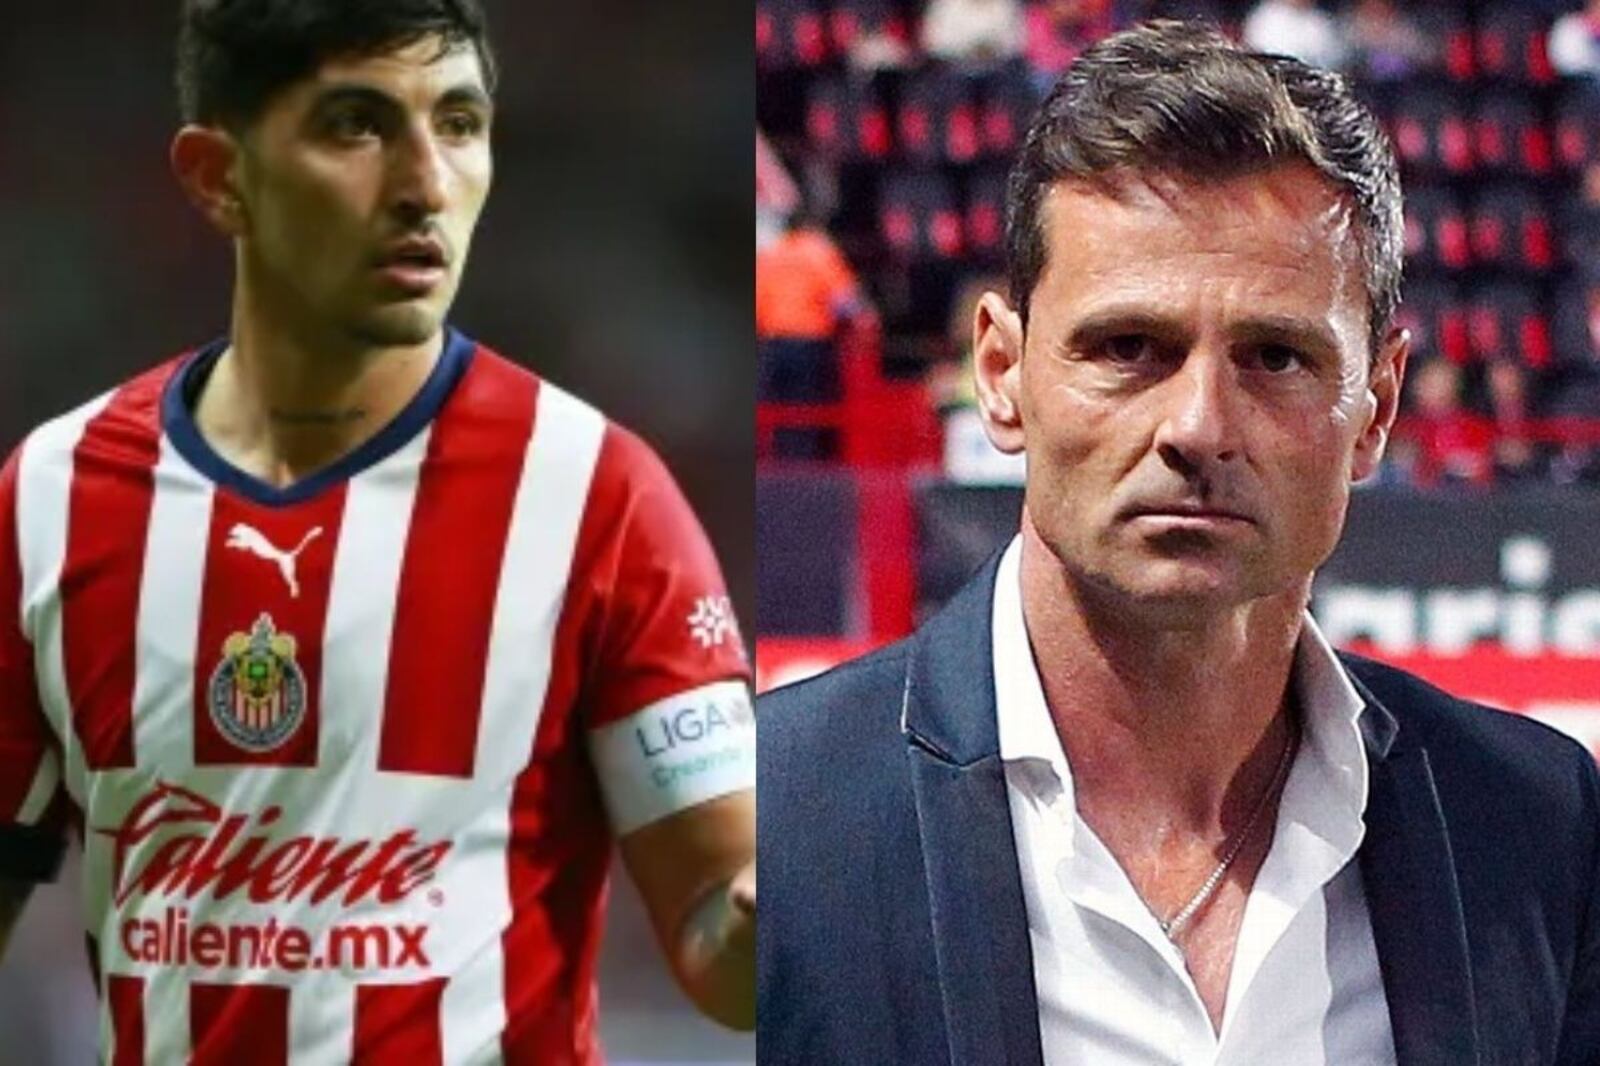 They uncover the reasons why Cocca did not call Guzmán from Chivas